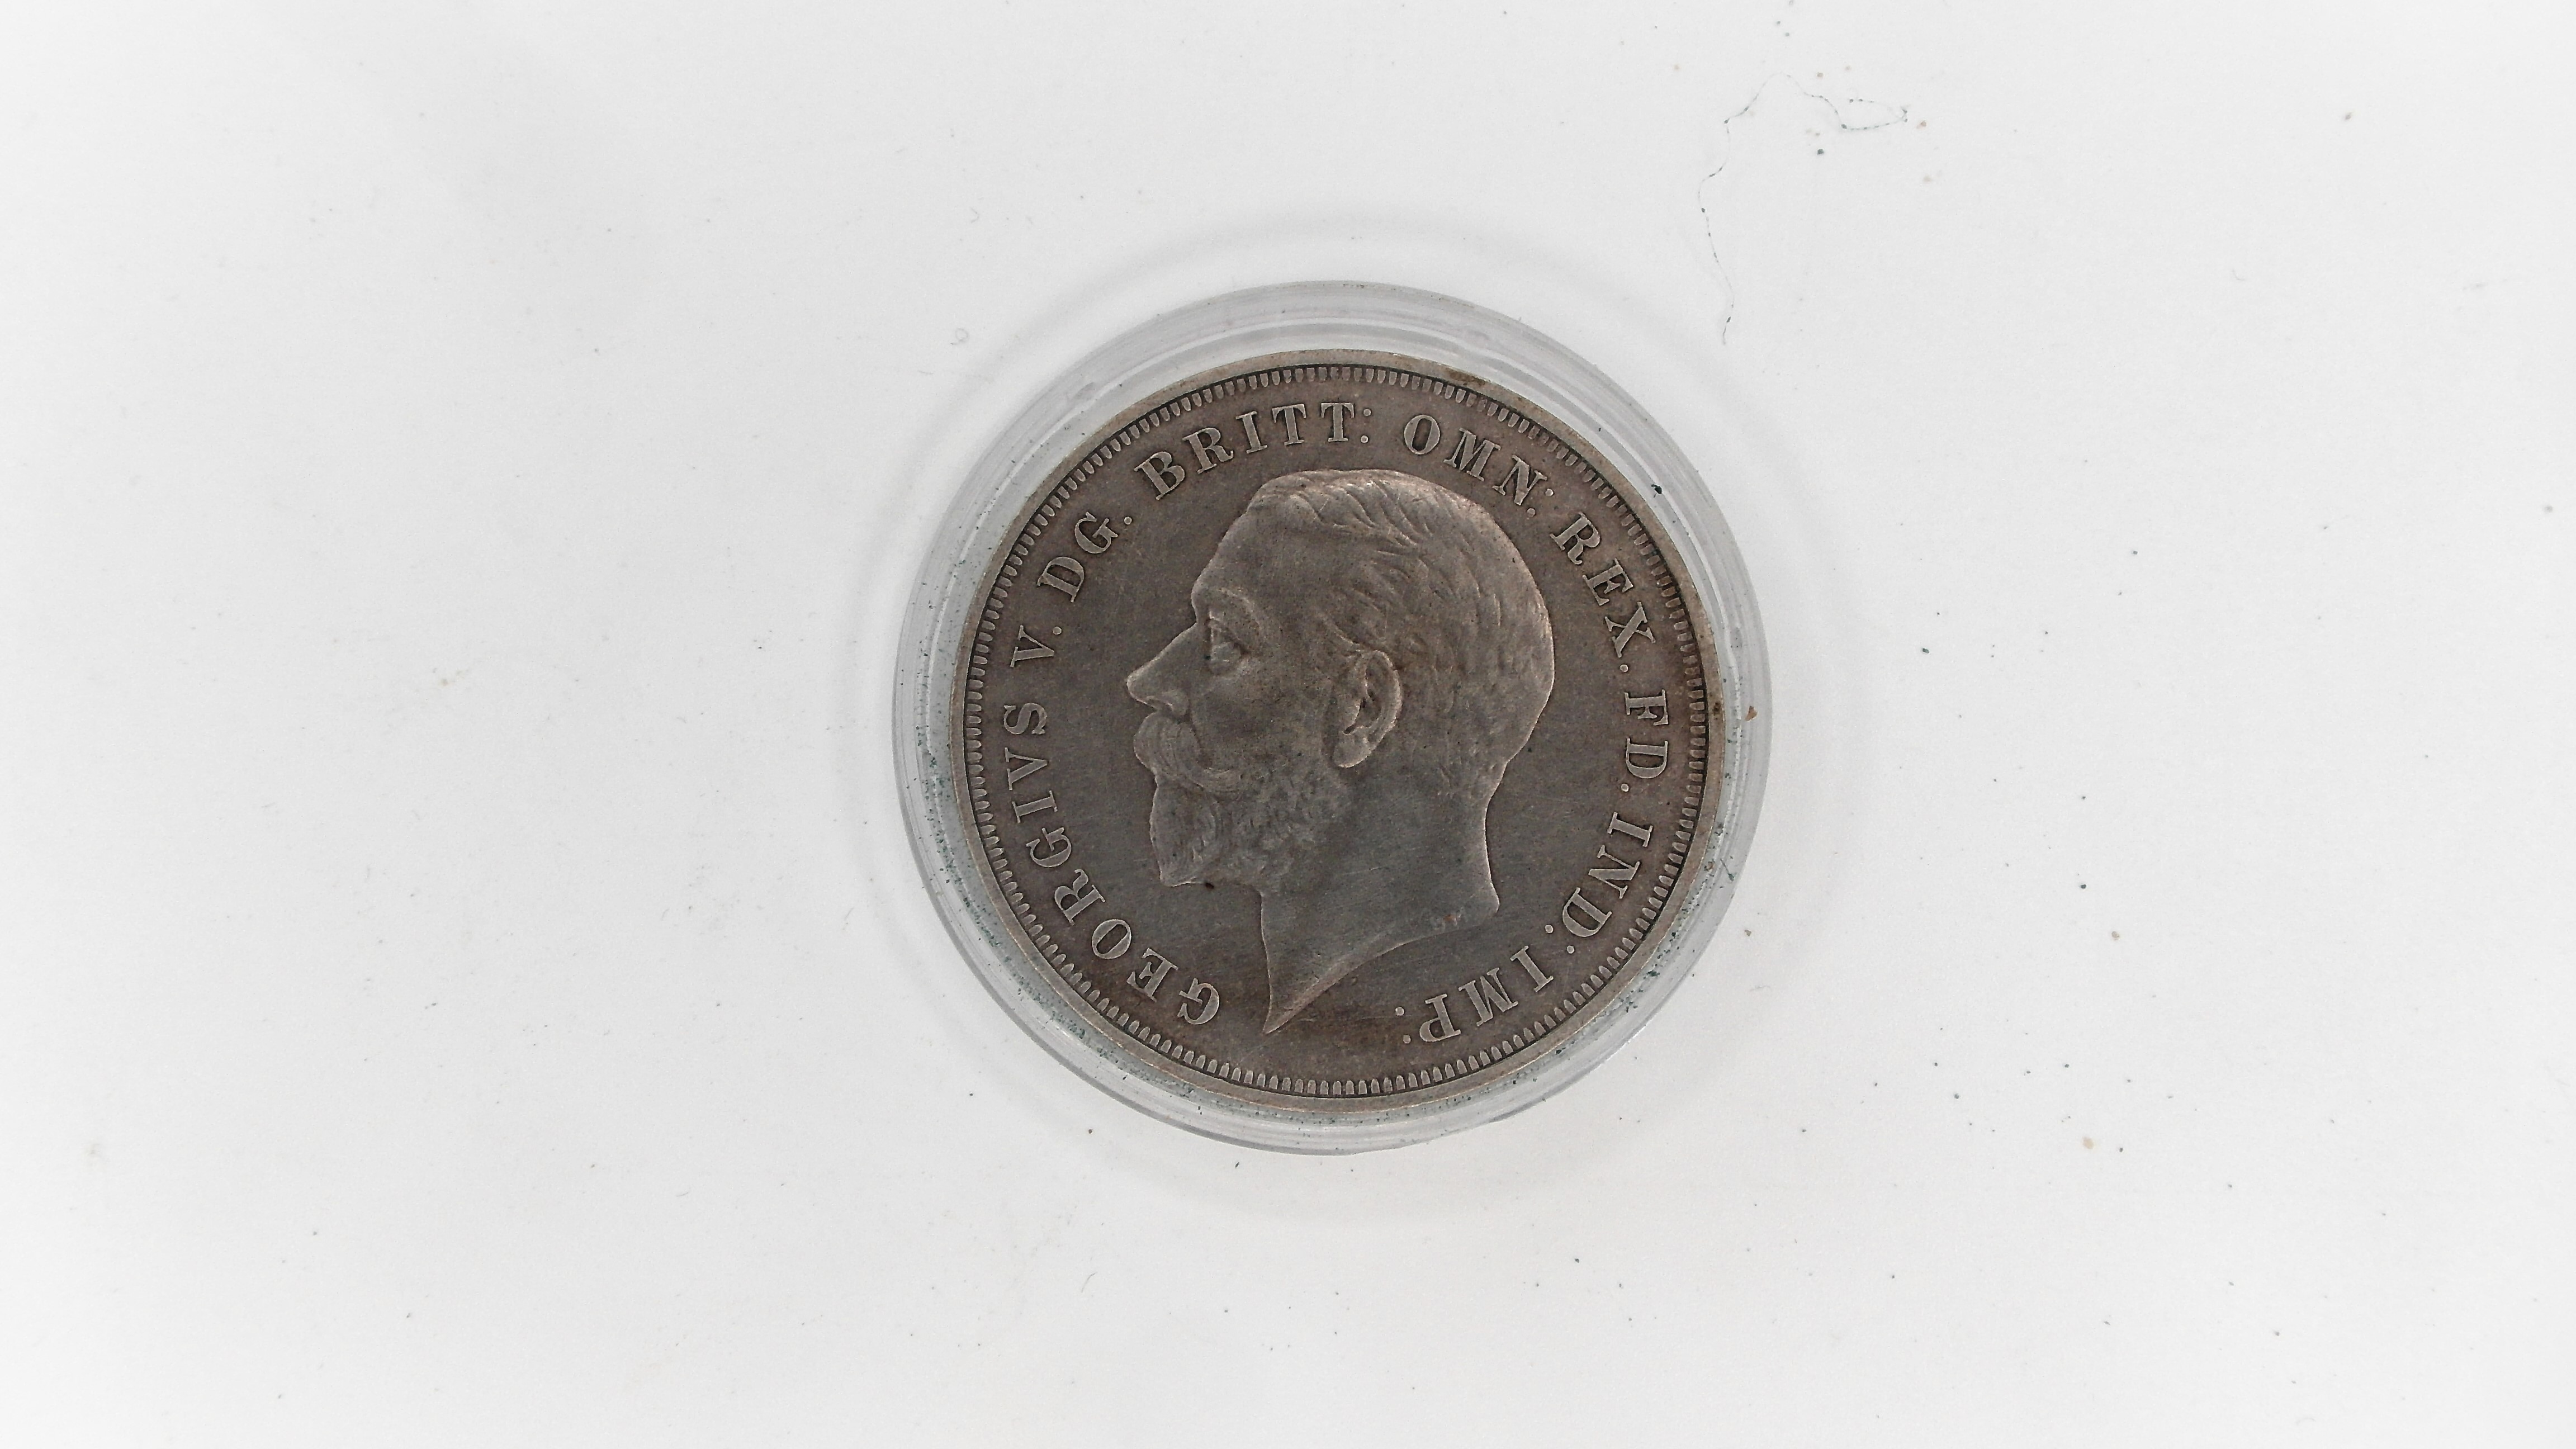 QUITE RARE 1935 GEORGE V JUBILEE CROWN - Image 2 of 2